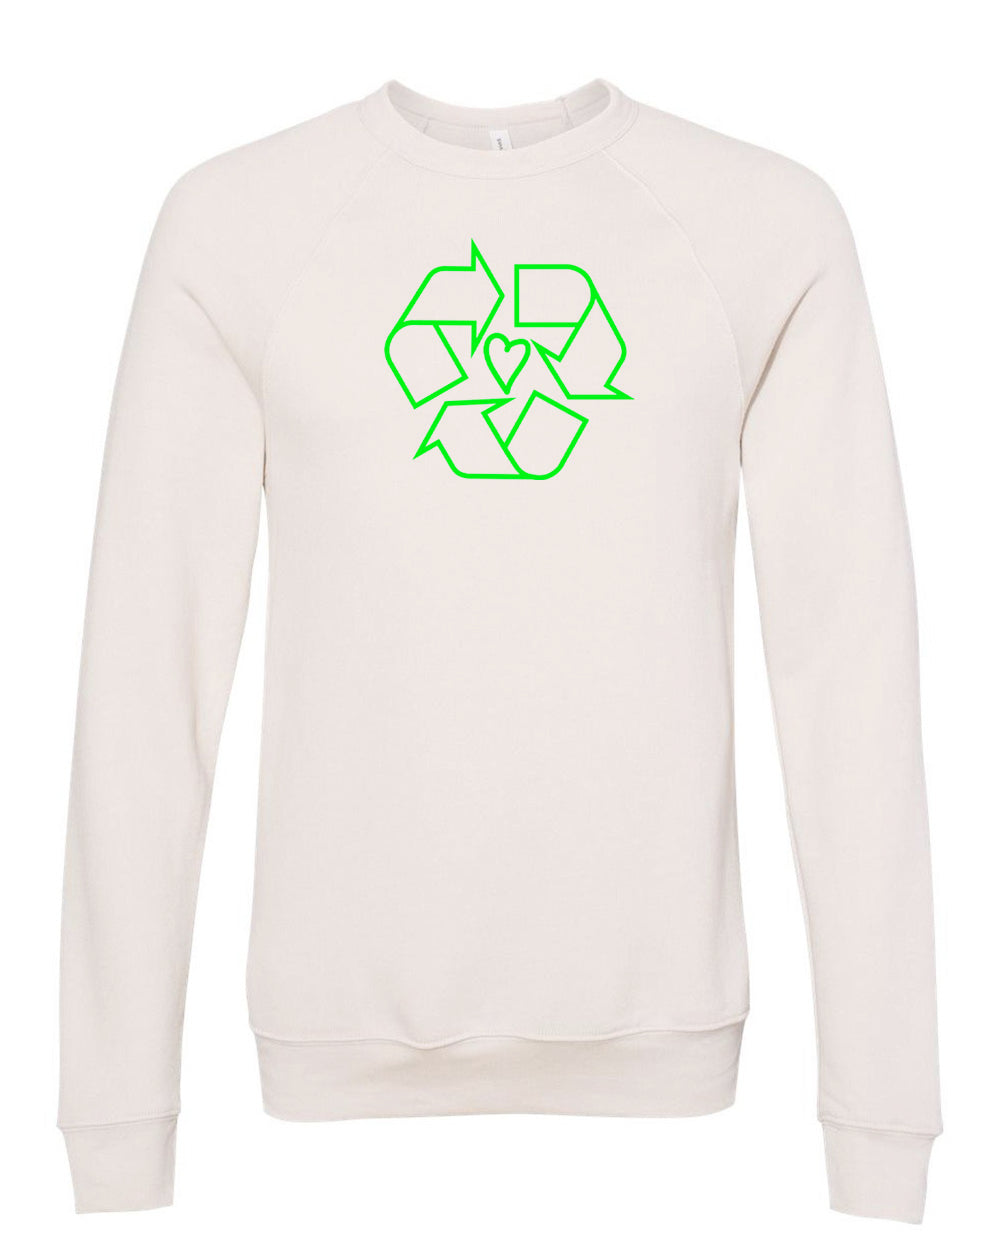 REUSE REDUCE Crews | Unsettled Apparel